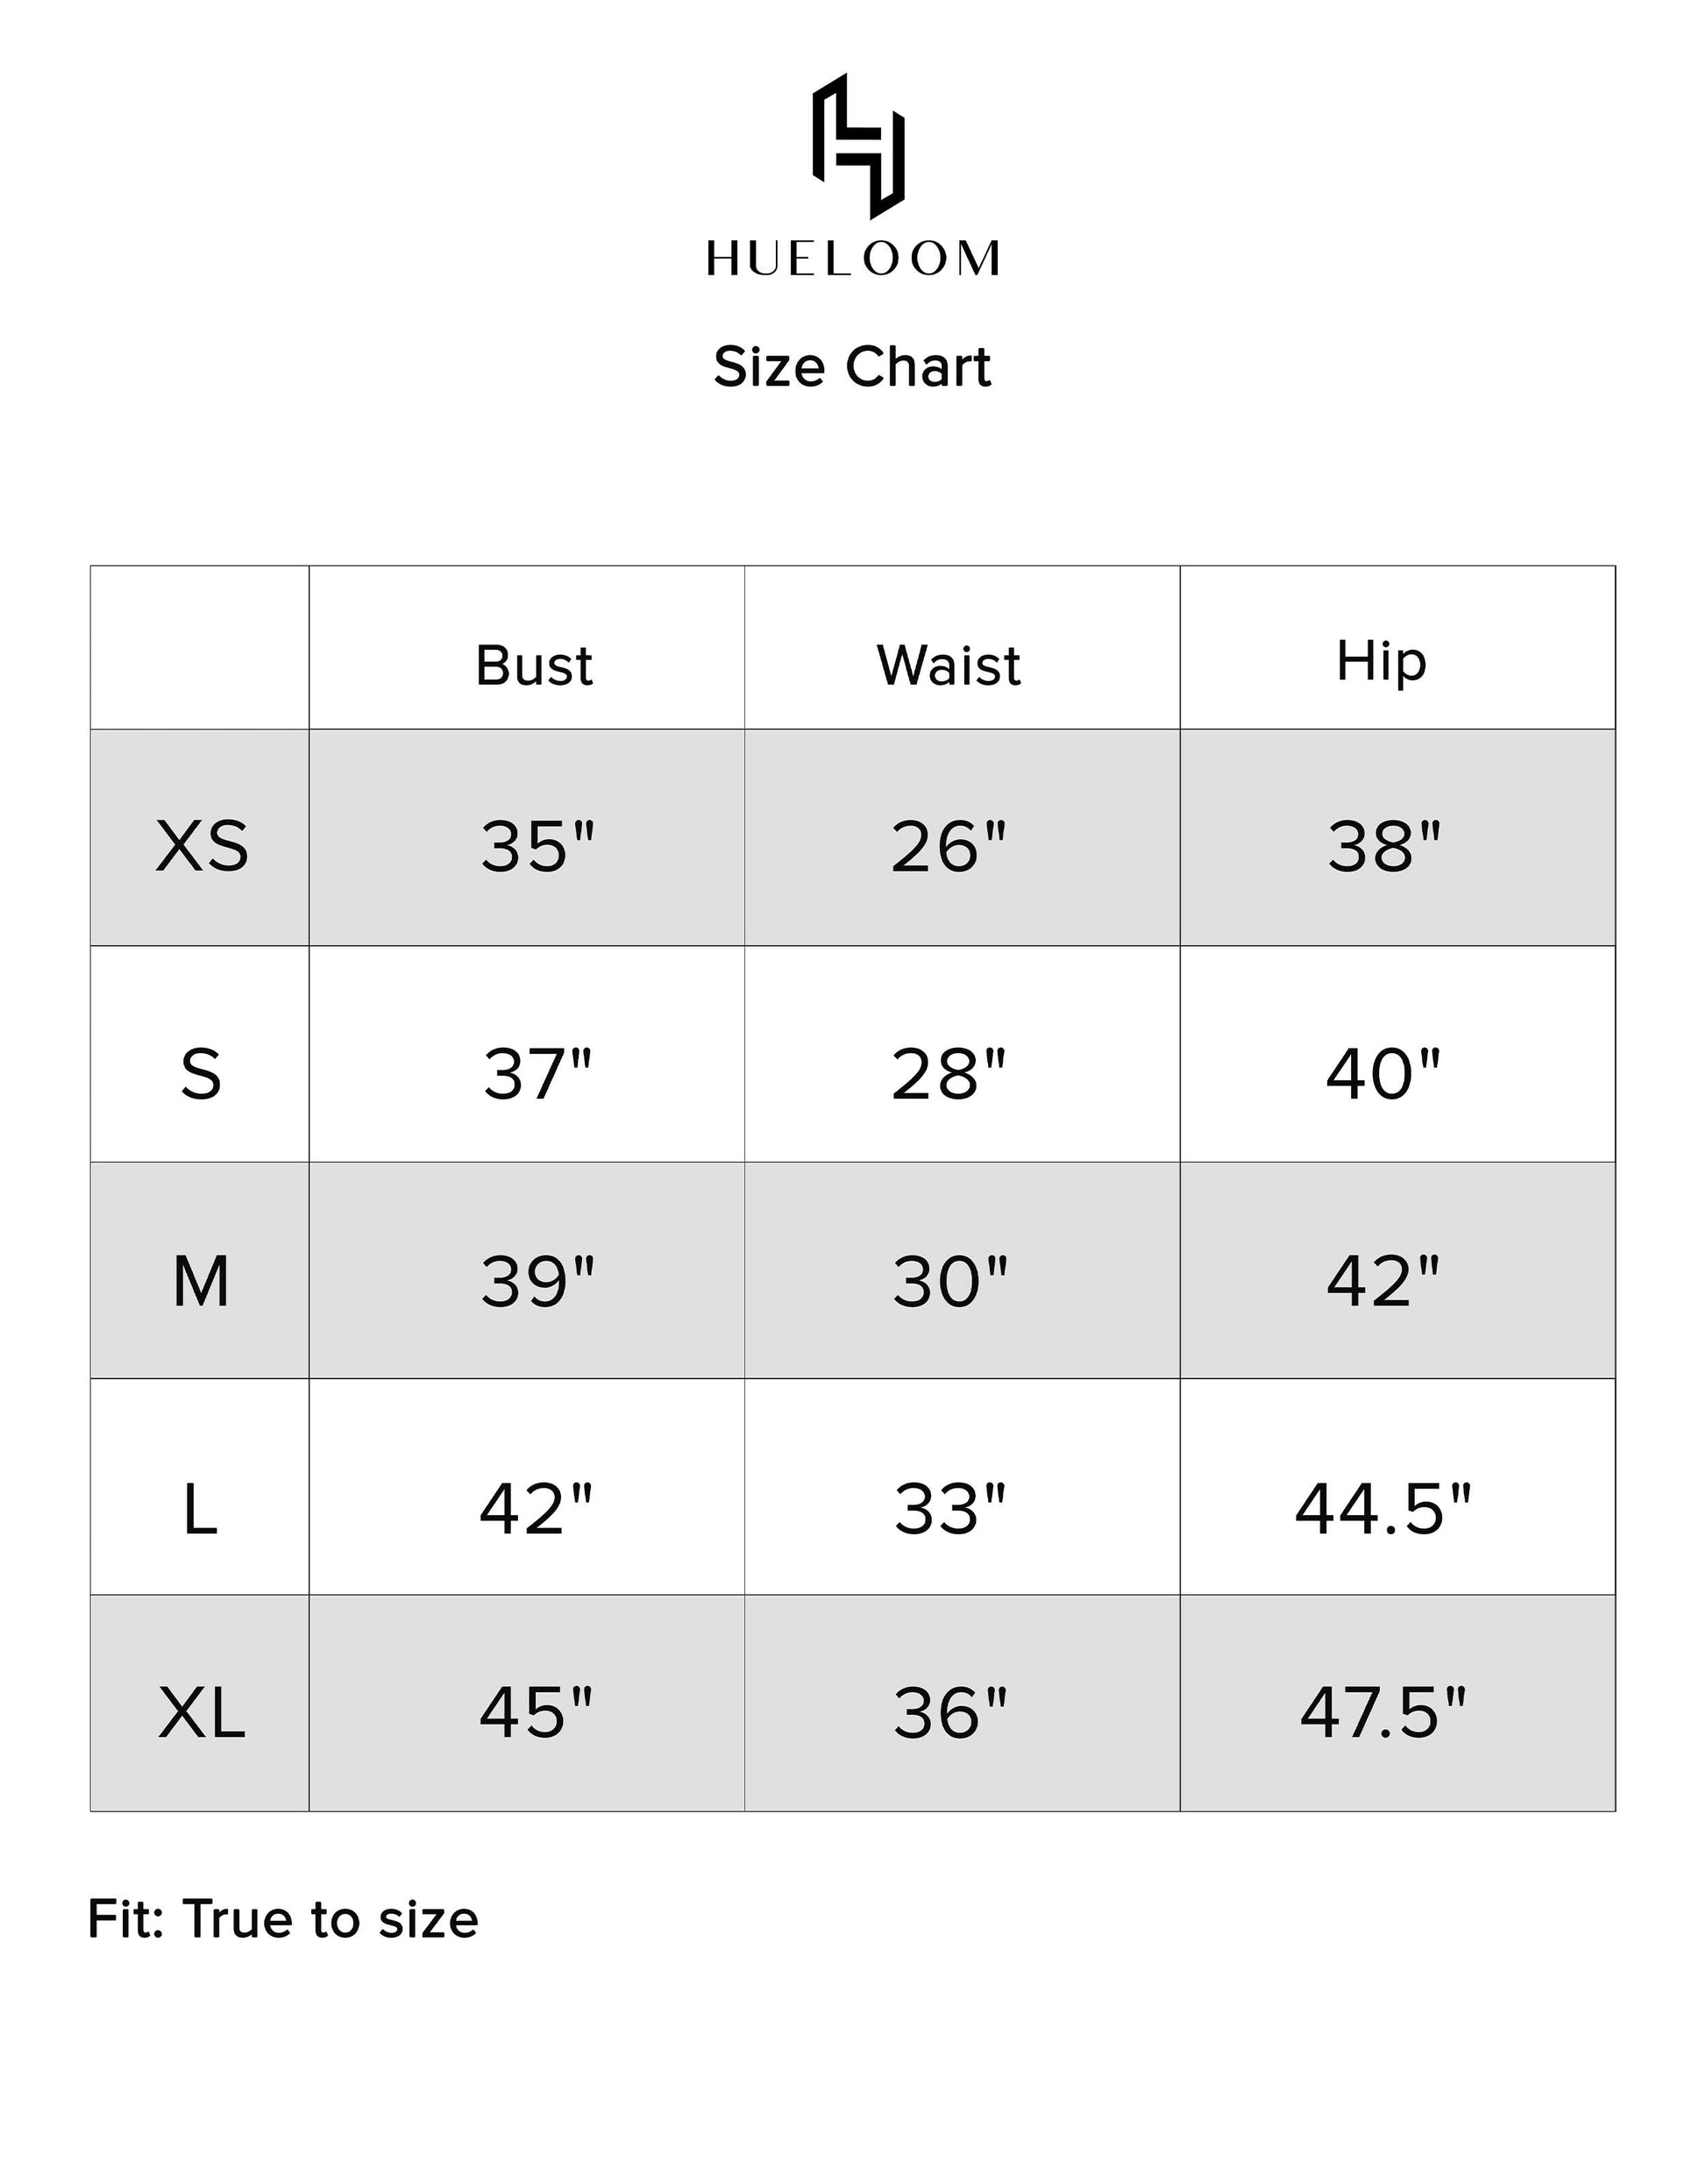 Hueloom Reversible Cut-out dress size chart display for accurate sizing.